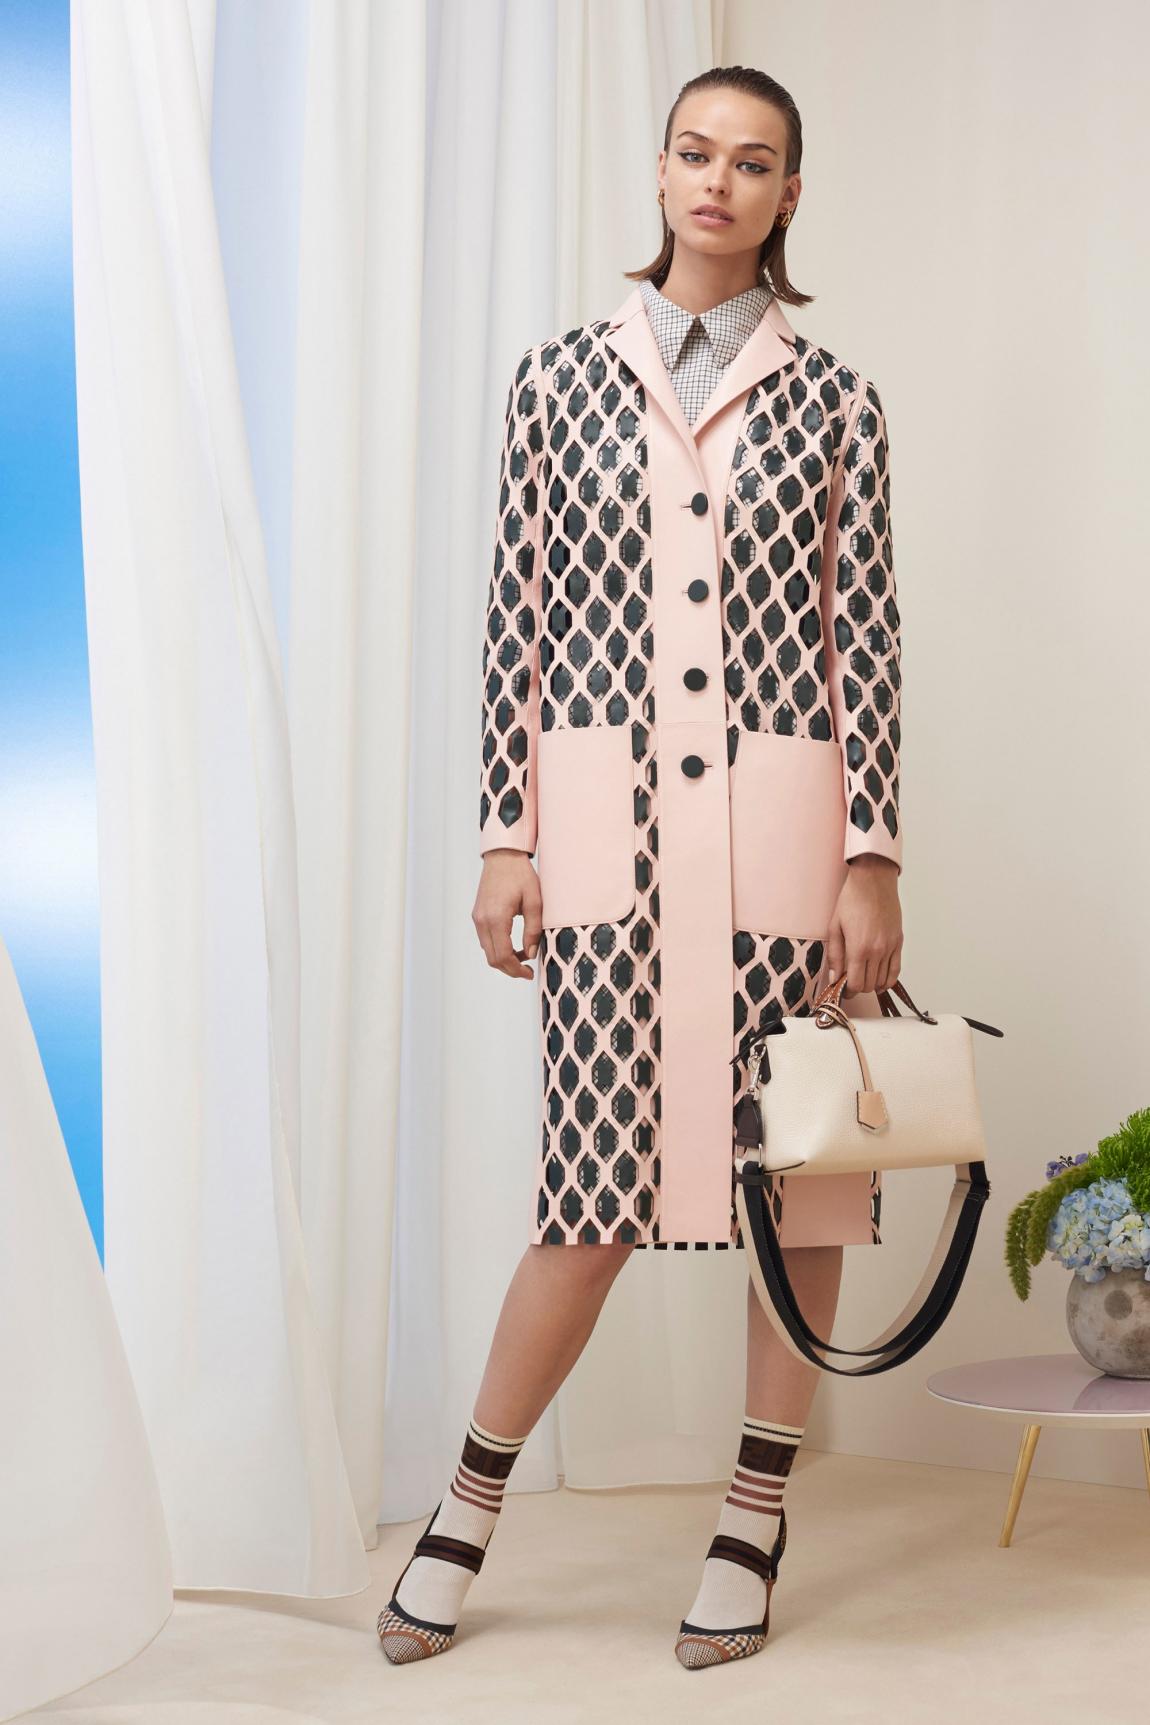 Pre-Fall Fendi collection as though created for Valentine's Day